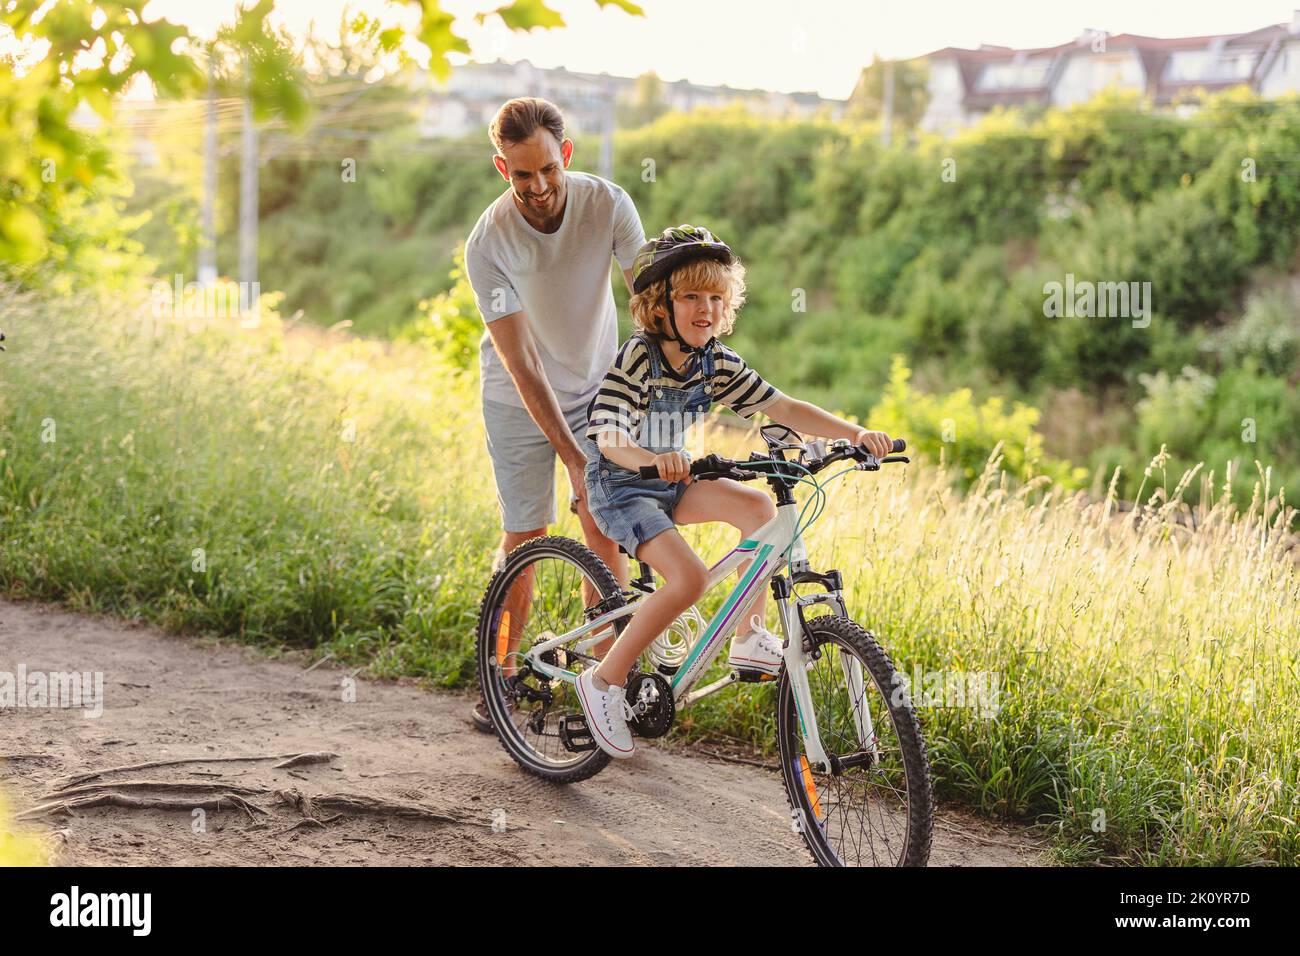 Father teaching his son how to ride a bicycle Stock Photo